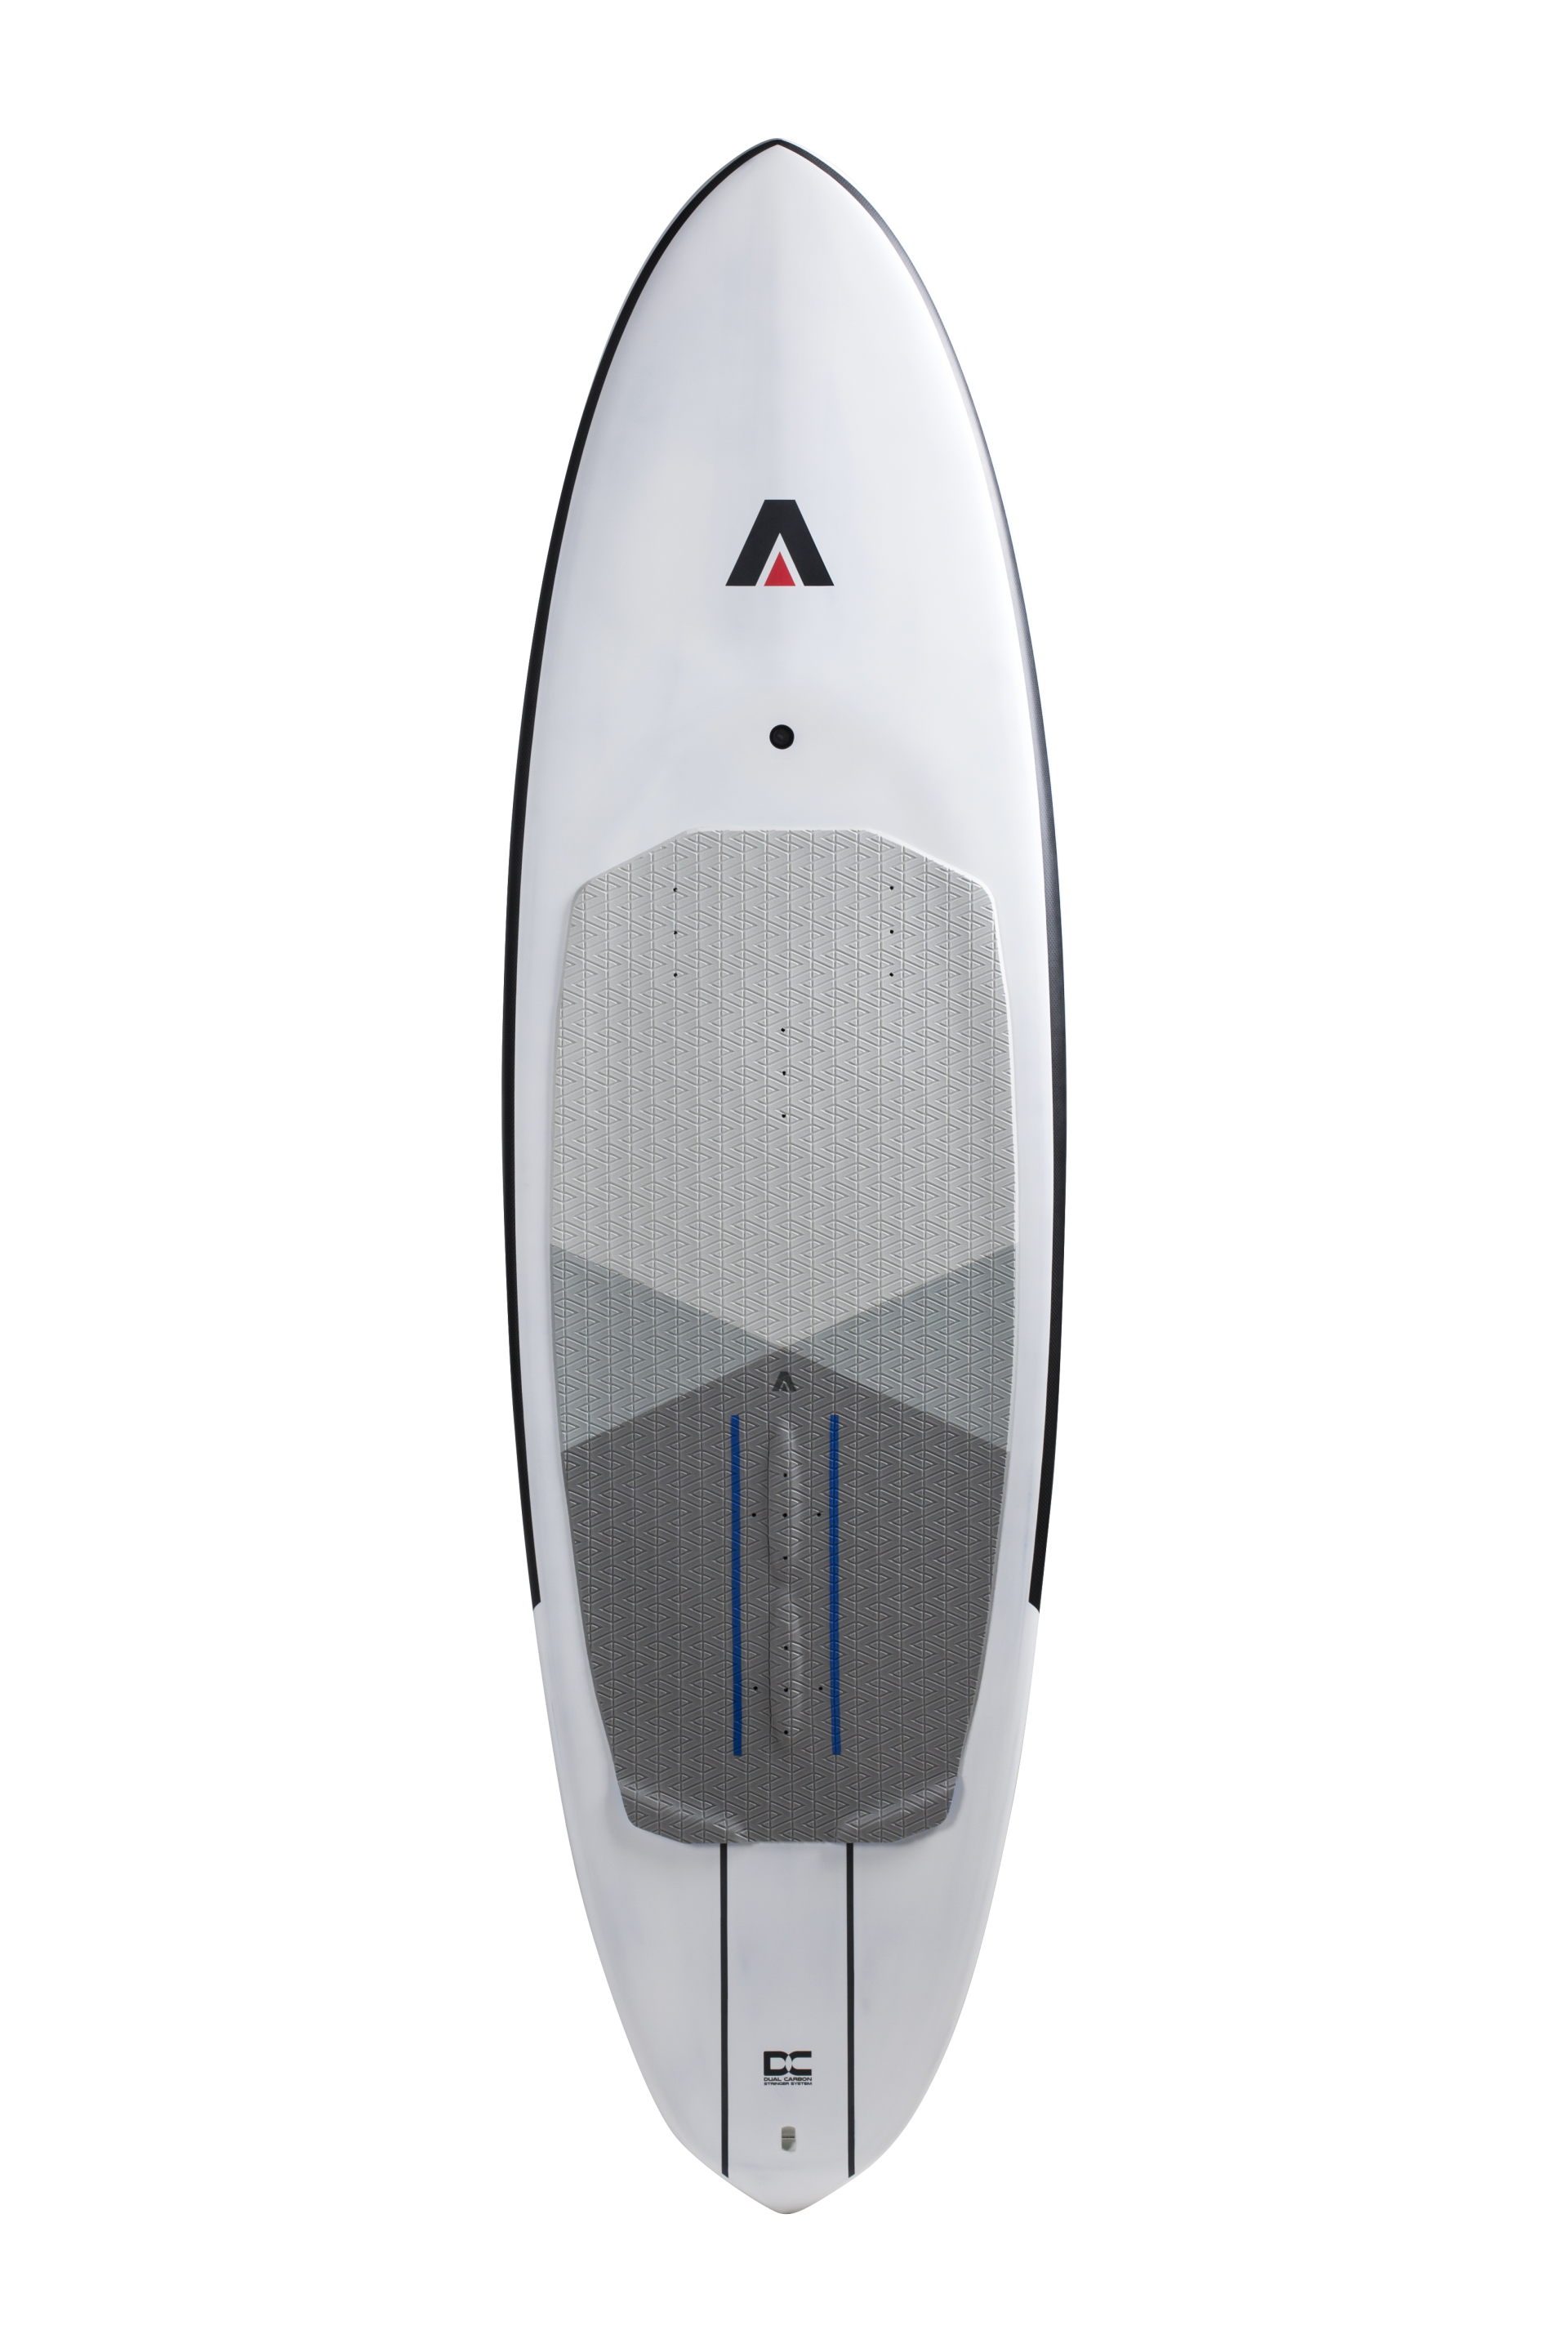 Armstrong Midlength Foilboard 85 Liter